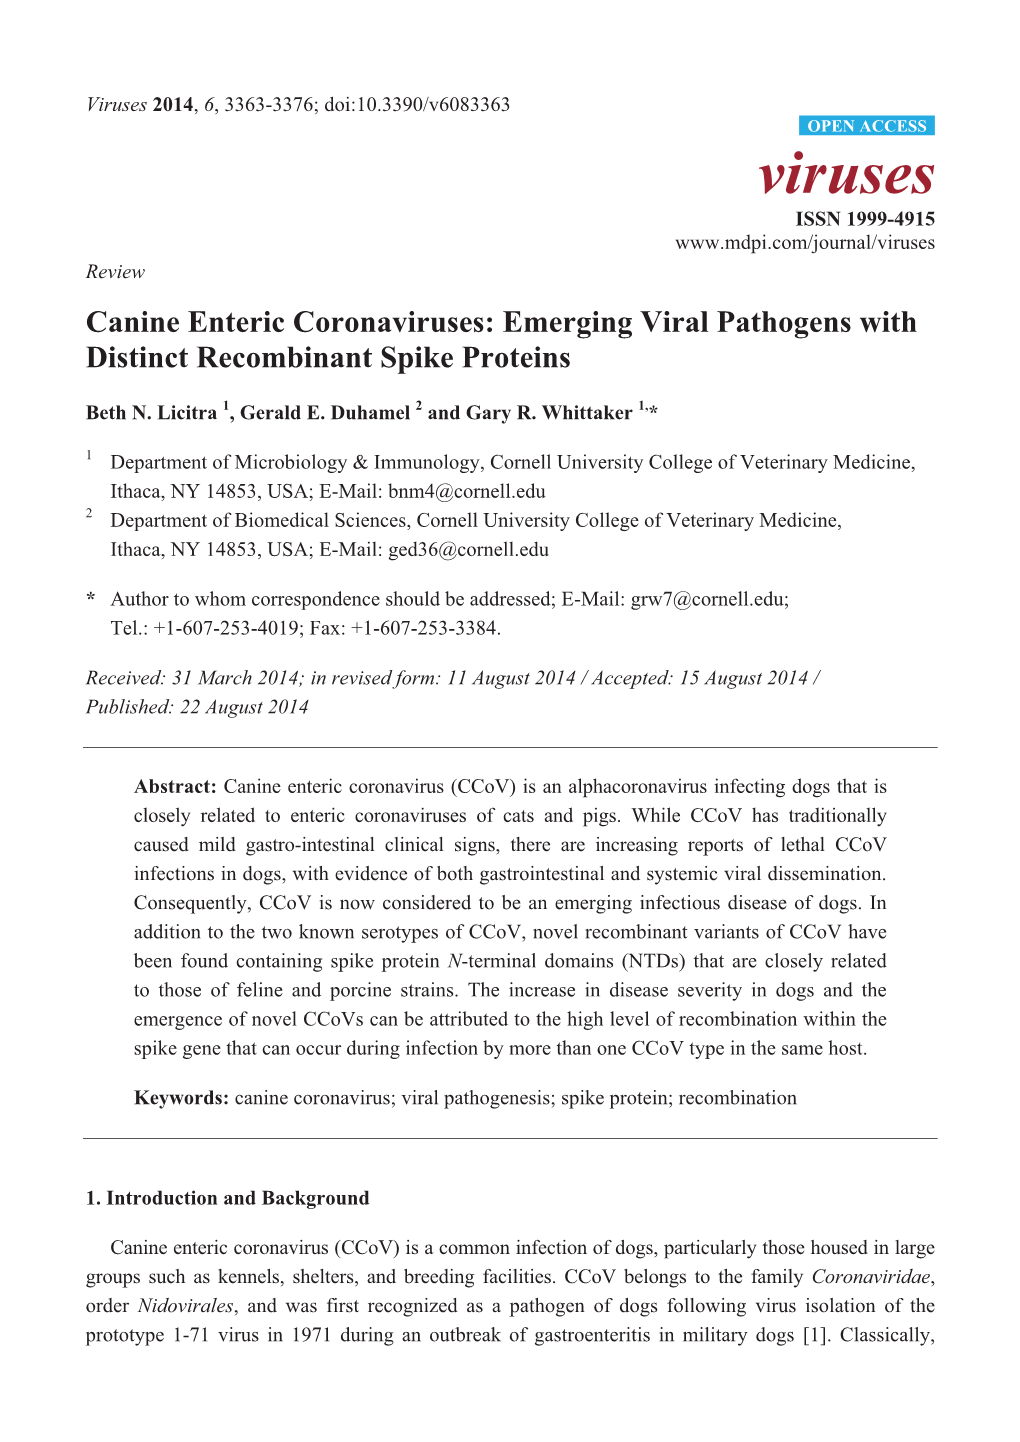 Canine Enteric Coronaviruses: Emerging Viral Pathogens with Distinct Recombinant Spike Proteins